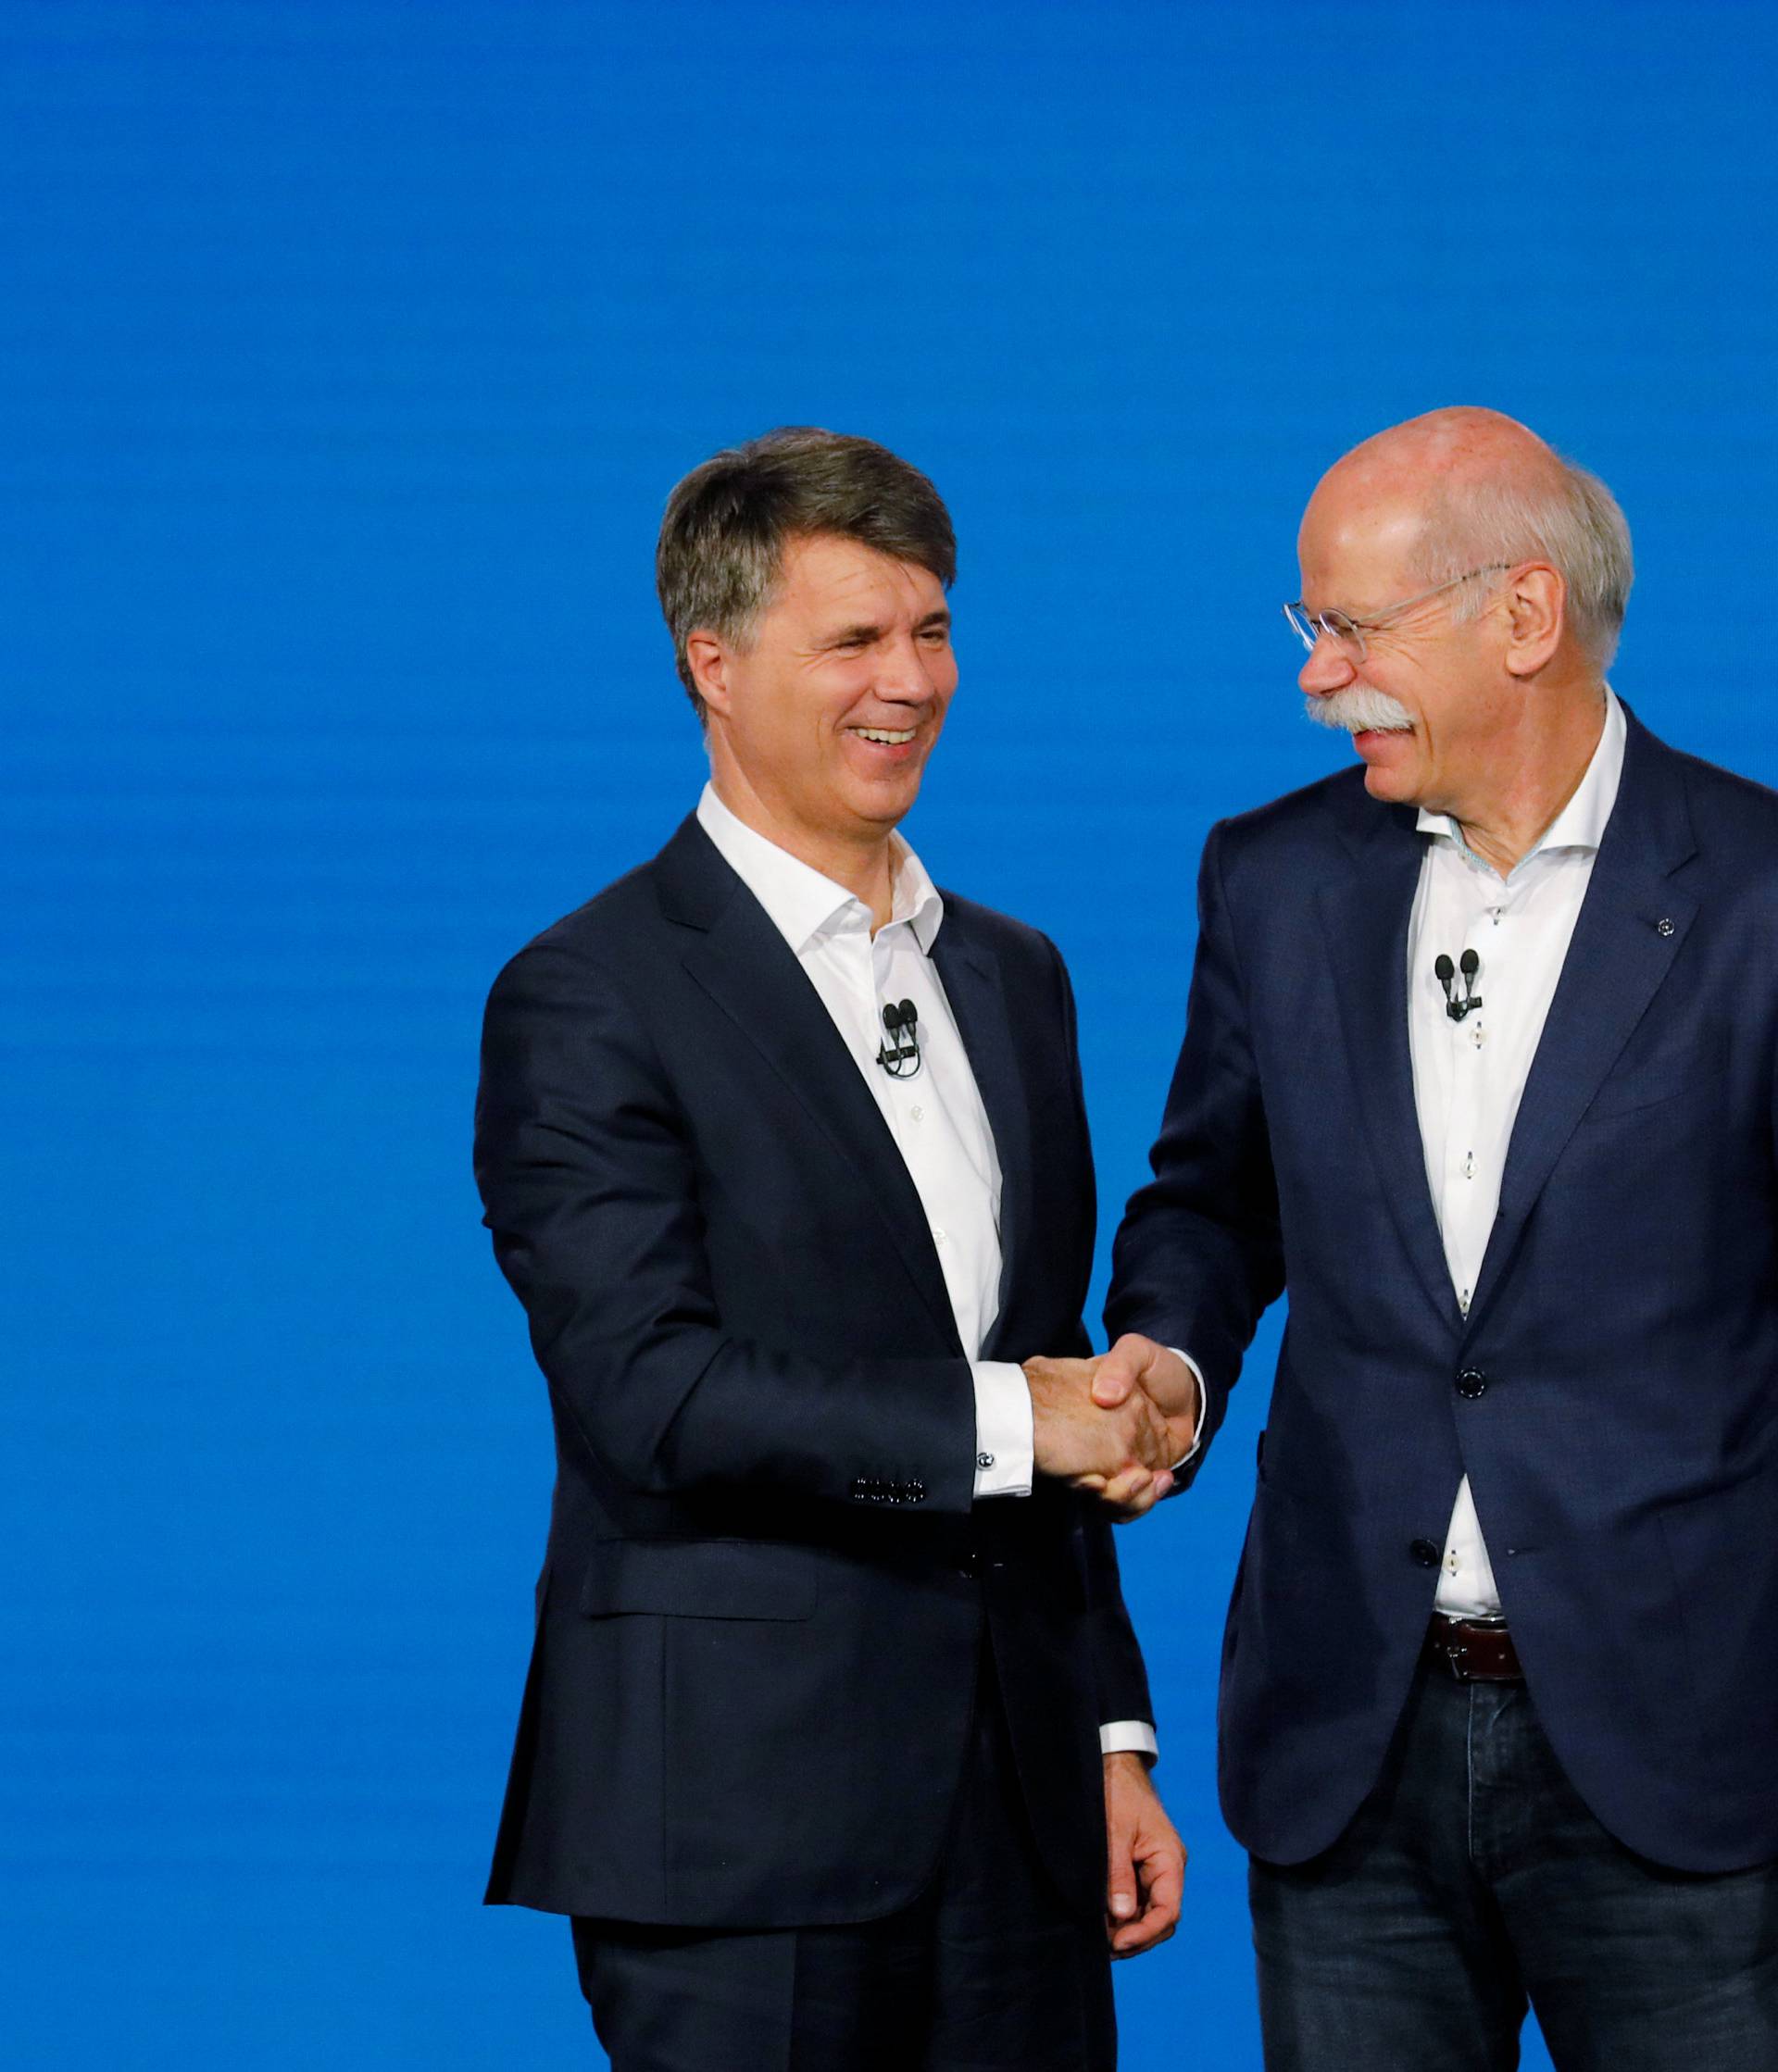 Harald Kruger, CEO and Chairman of the Board of Management of BMW AG and Dieter Zetsche, CEO of Daimler AG, shake hands at a news conference to present plans for combining the companies' car-sharing businesses, in Berlin